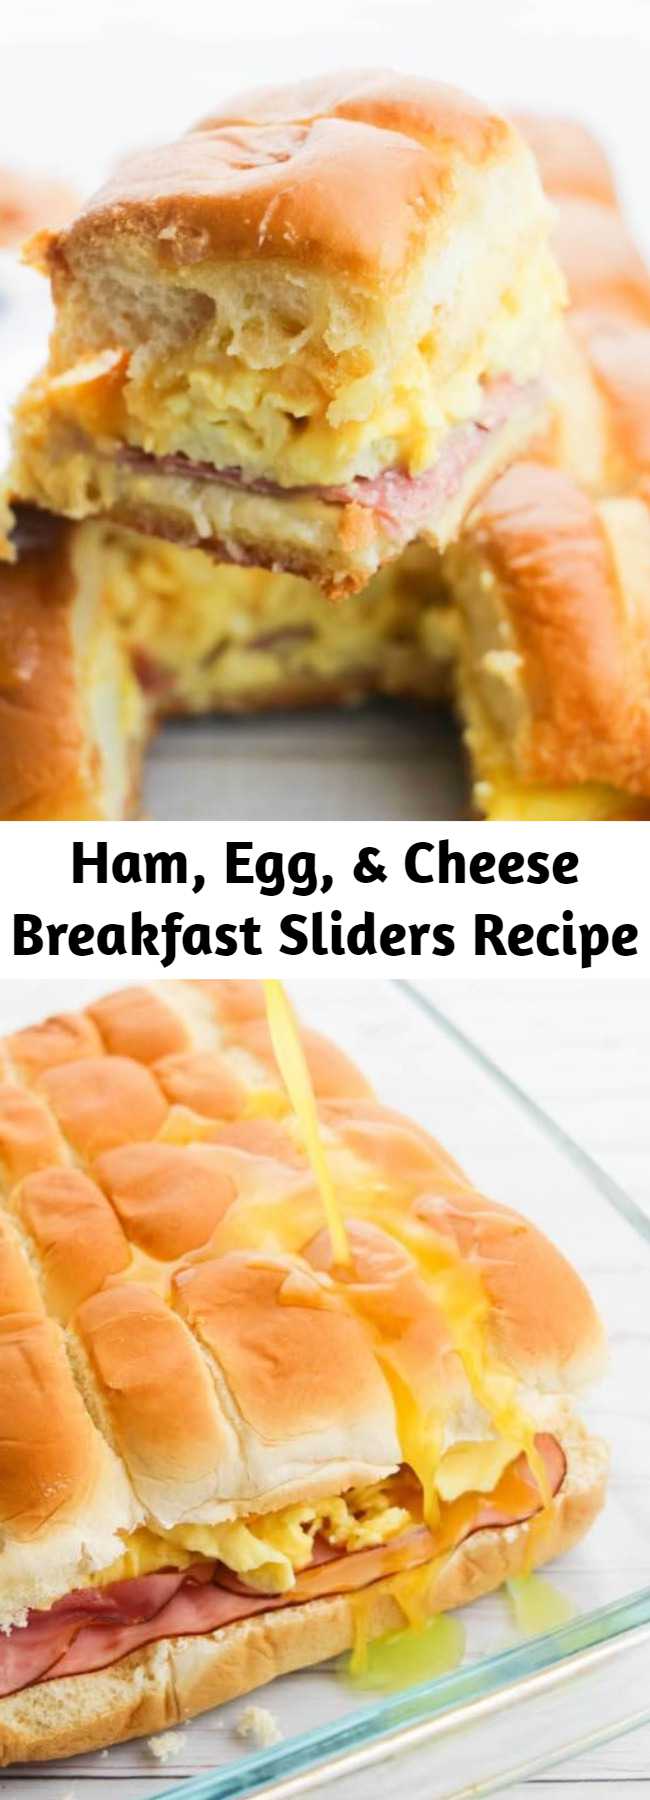 Ham, Egg, & Cheese Breakfast Sliders Recipe - What a way to start the day!! These delicious ham, egg and cheese breakfast sliders served warm out of the oven are sure to brighten up any morning! Perfect for holidays!